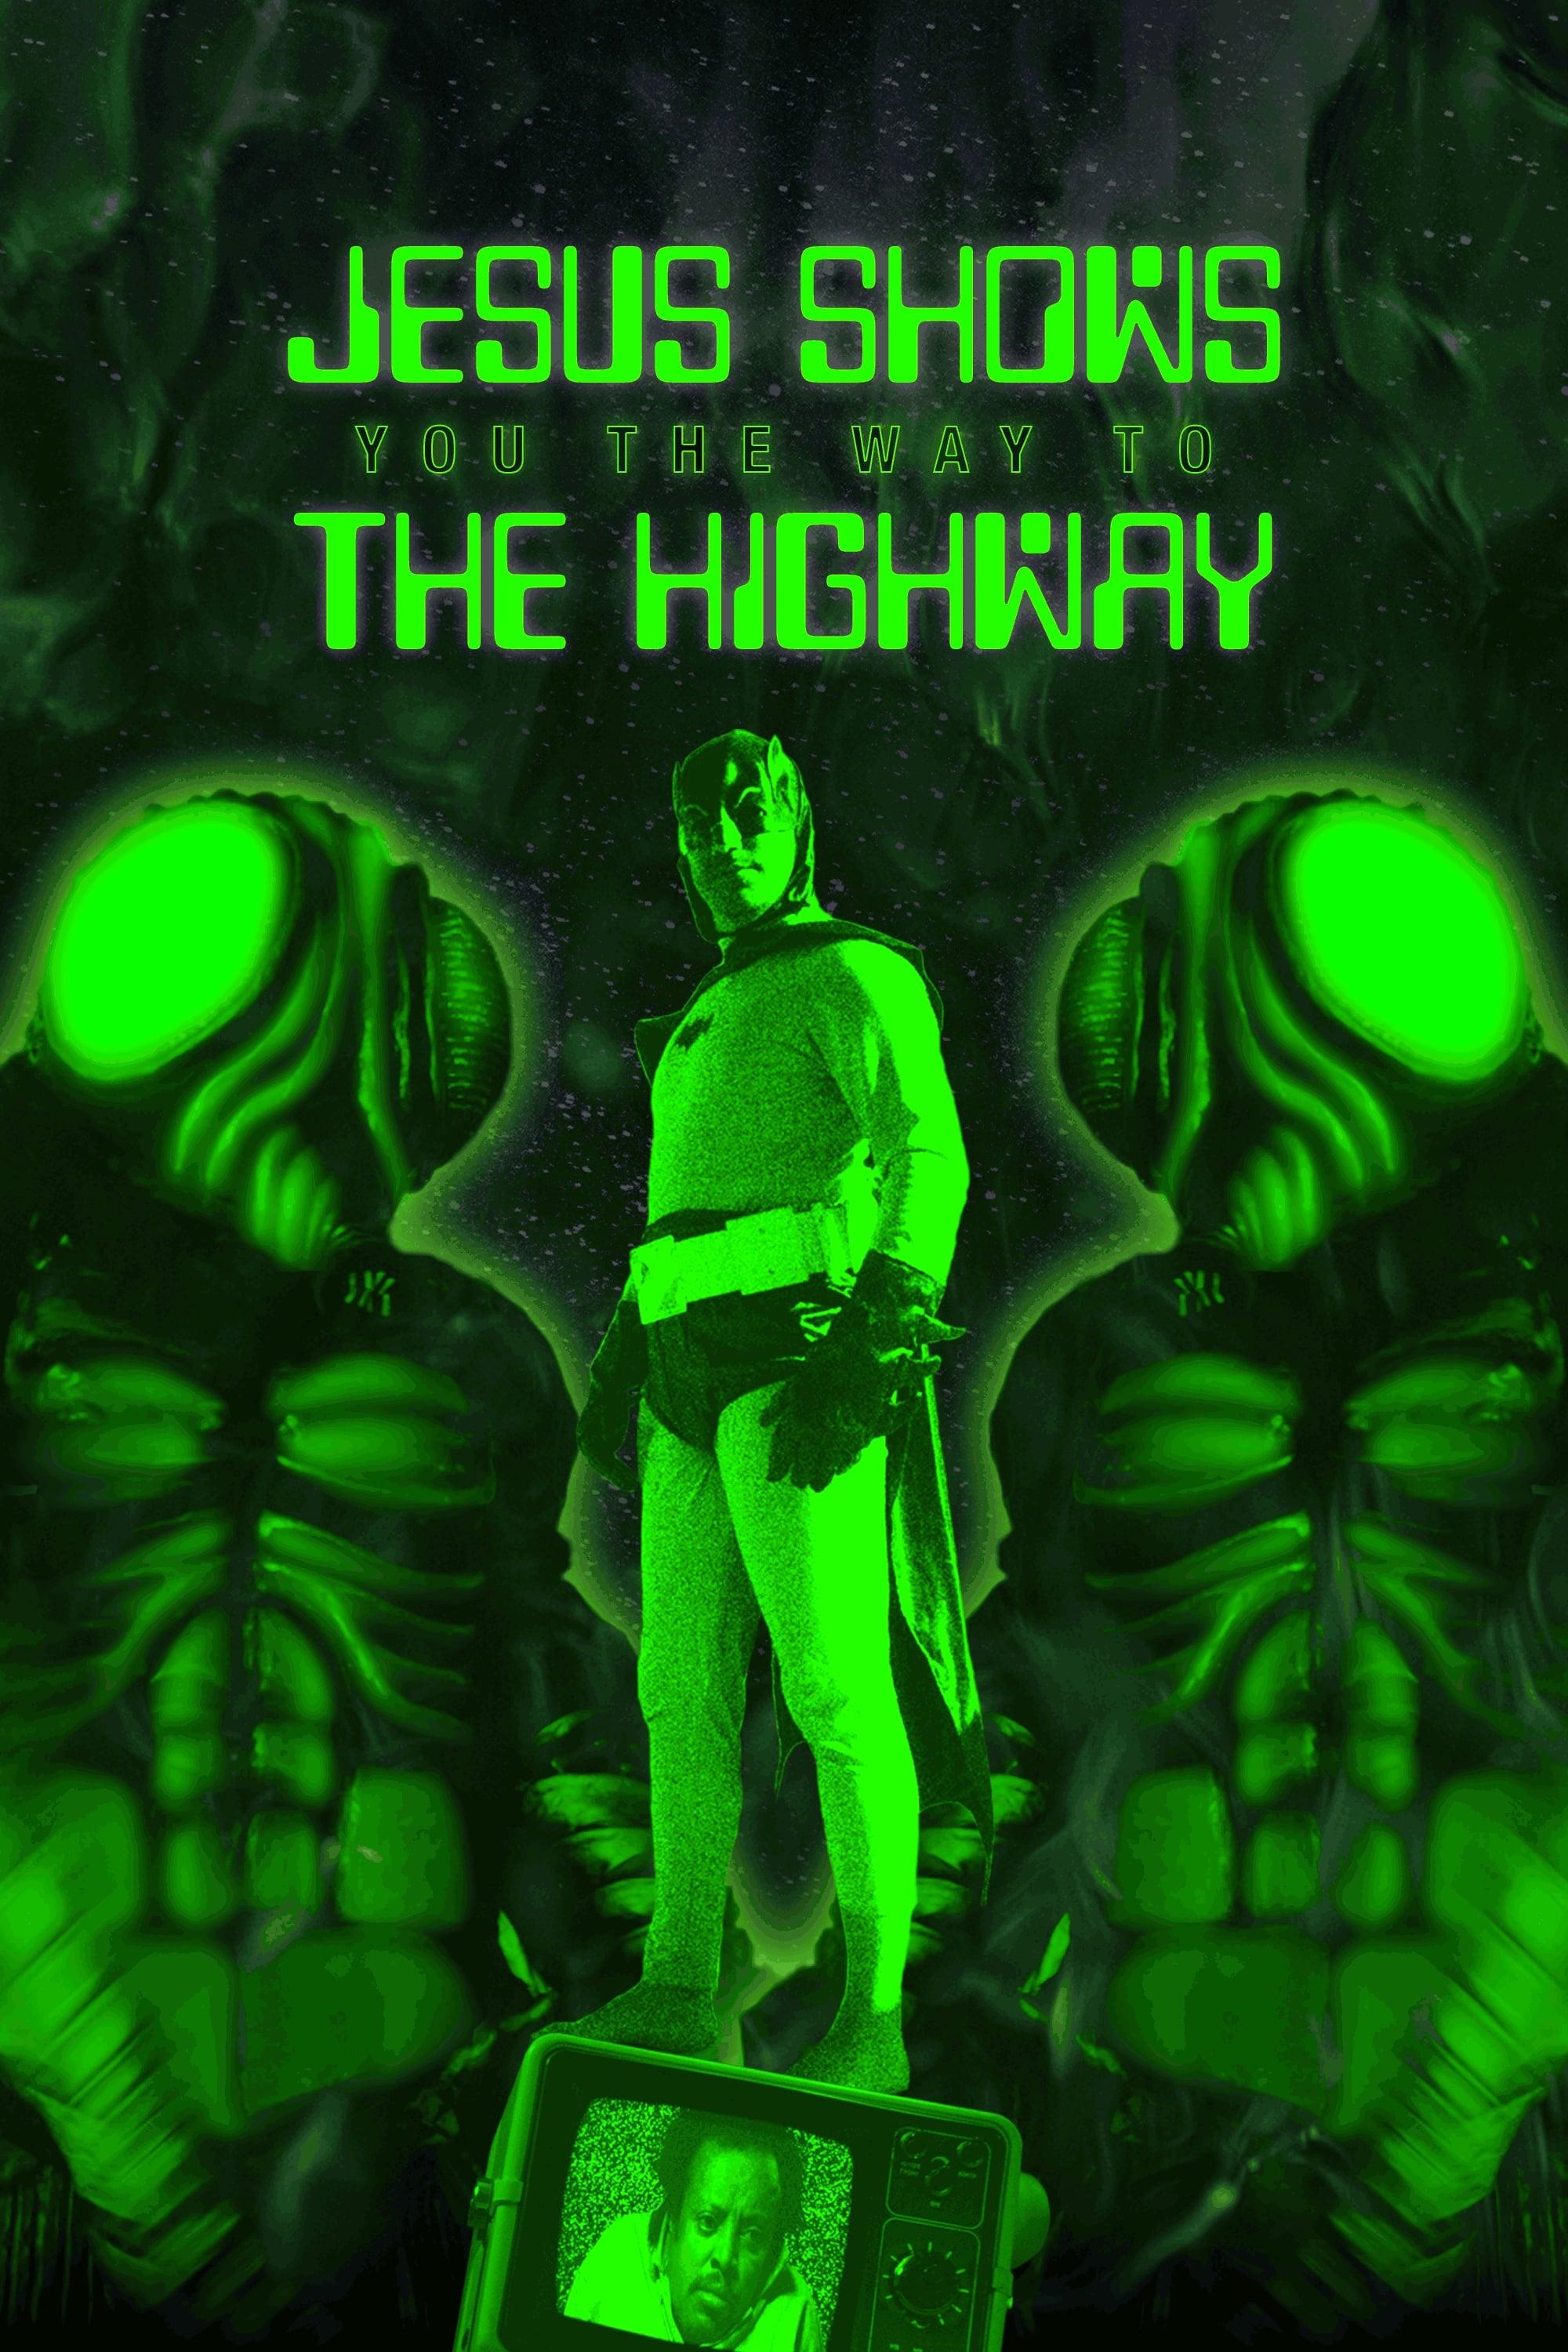 Jesus Shows You the Way to the Highway poster